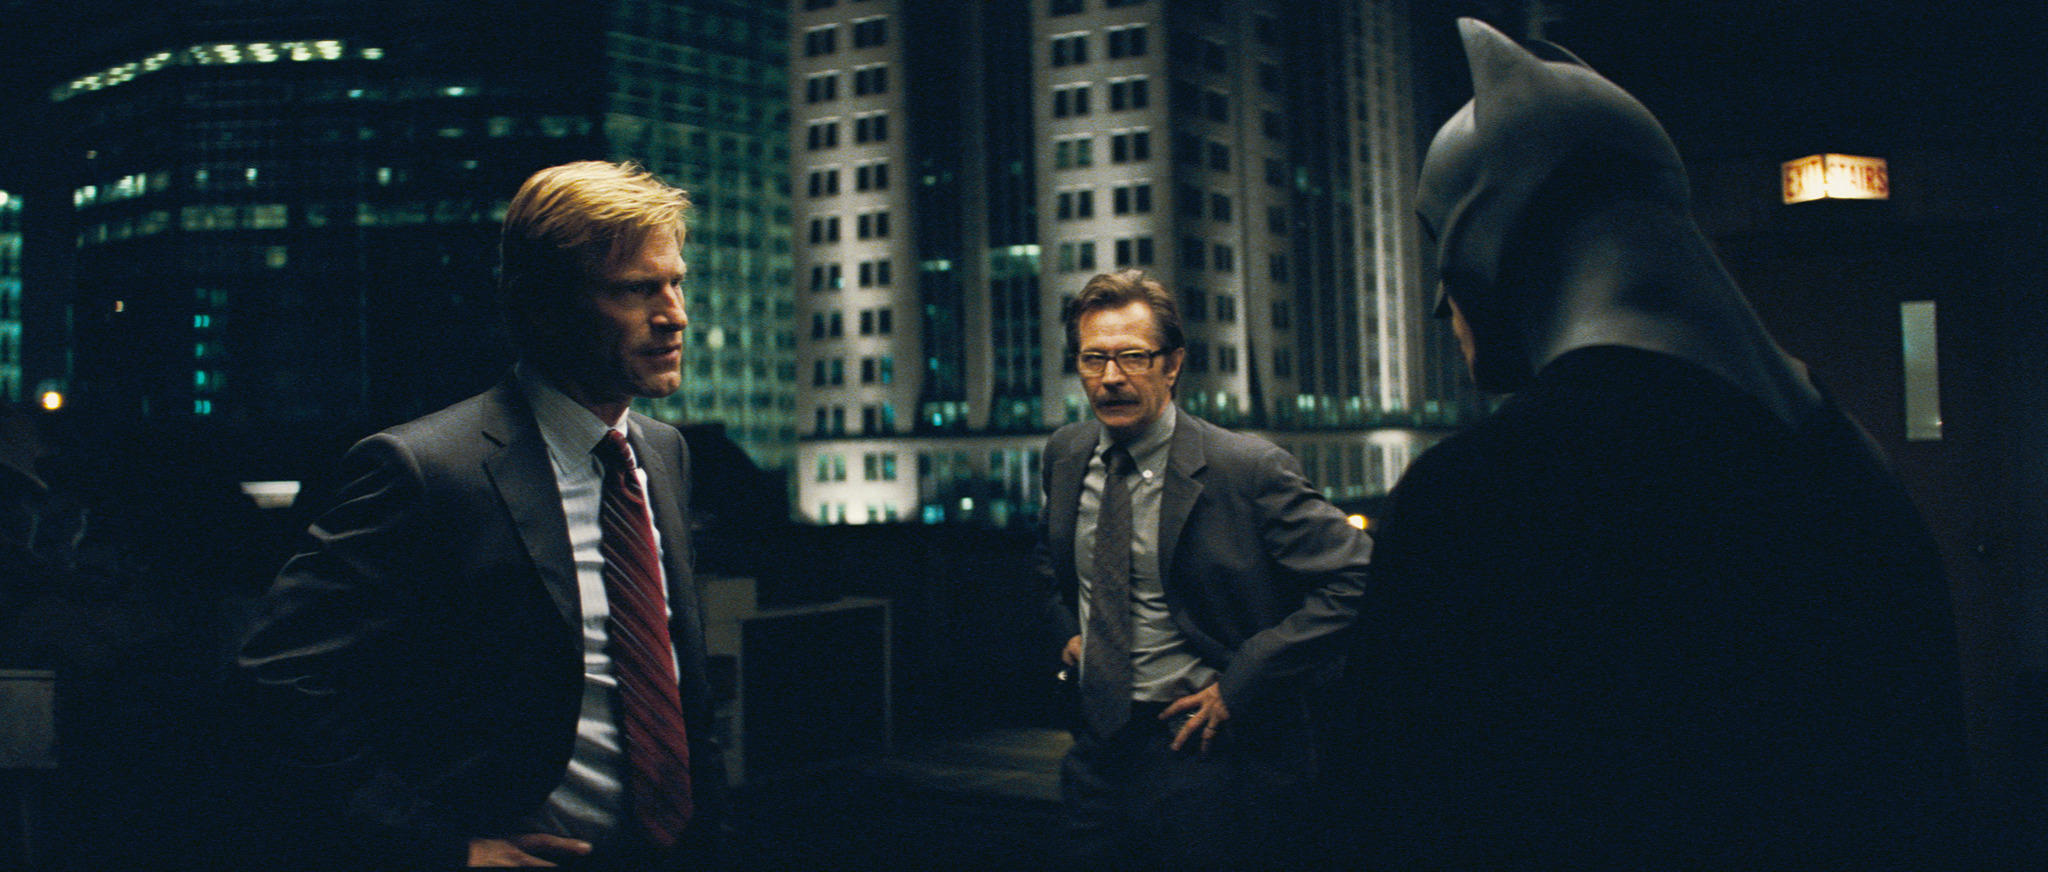 Gary Oldman, Christian Bale, and Aaron Eckhart in The Dark Knight (2008)